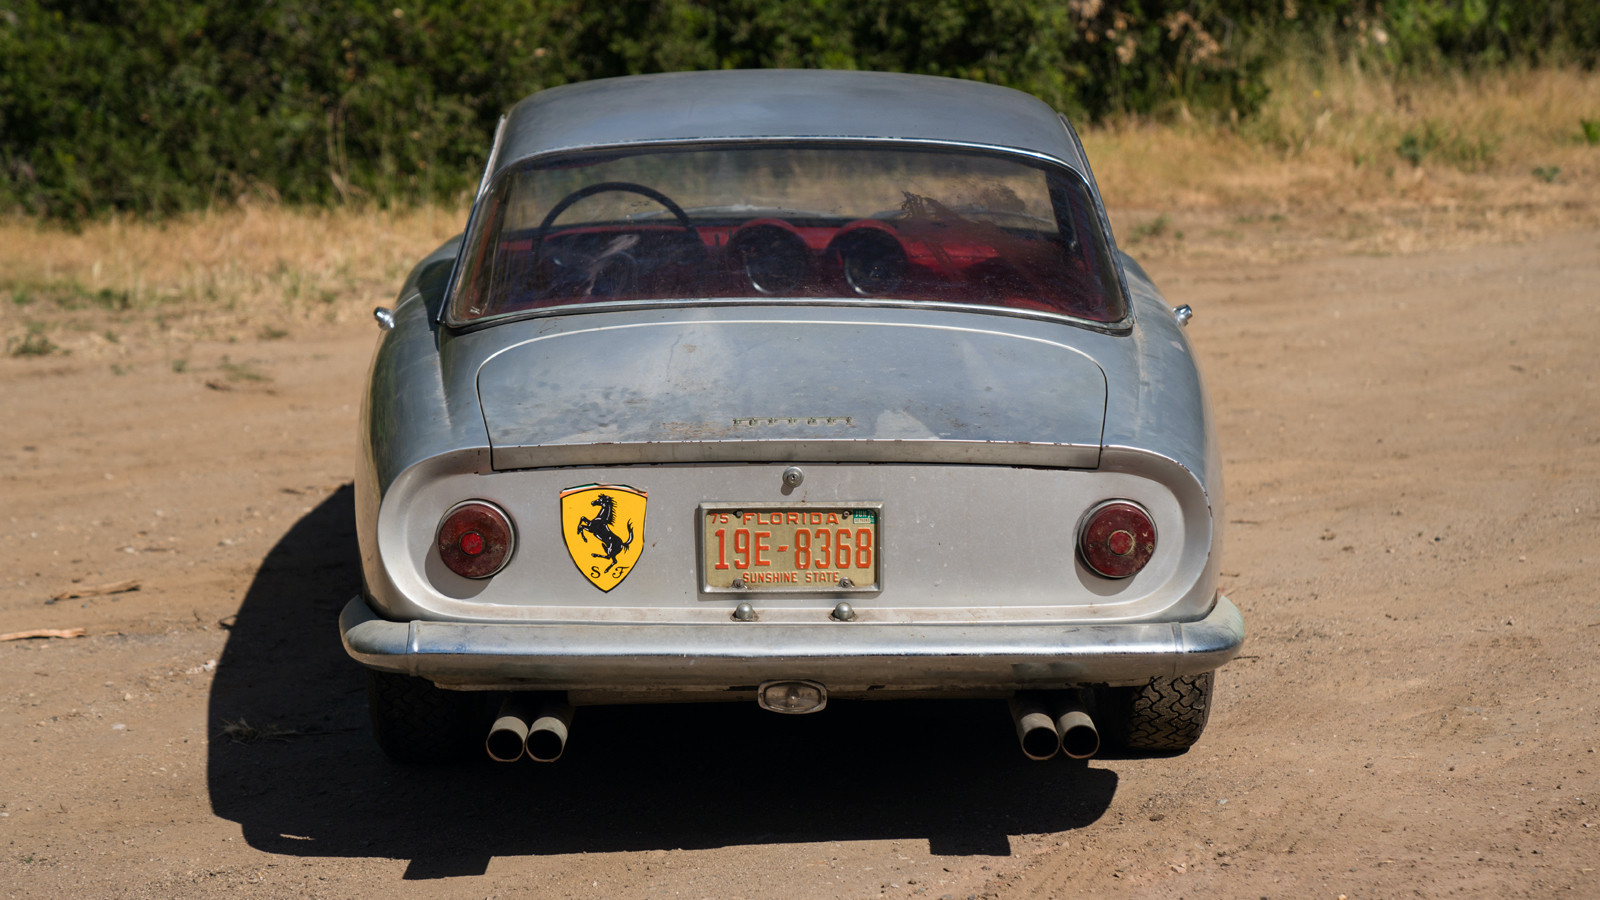 This barn-find Ferrari just sold for $1.3m